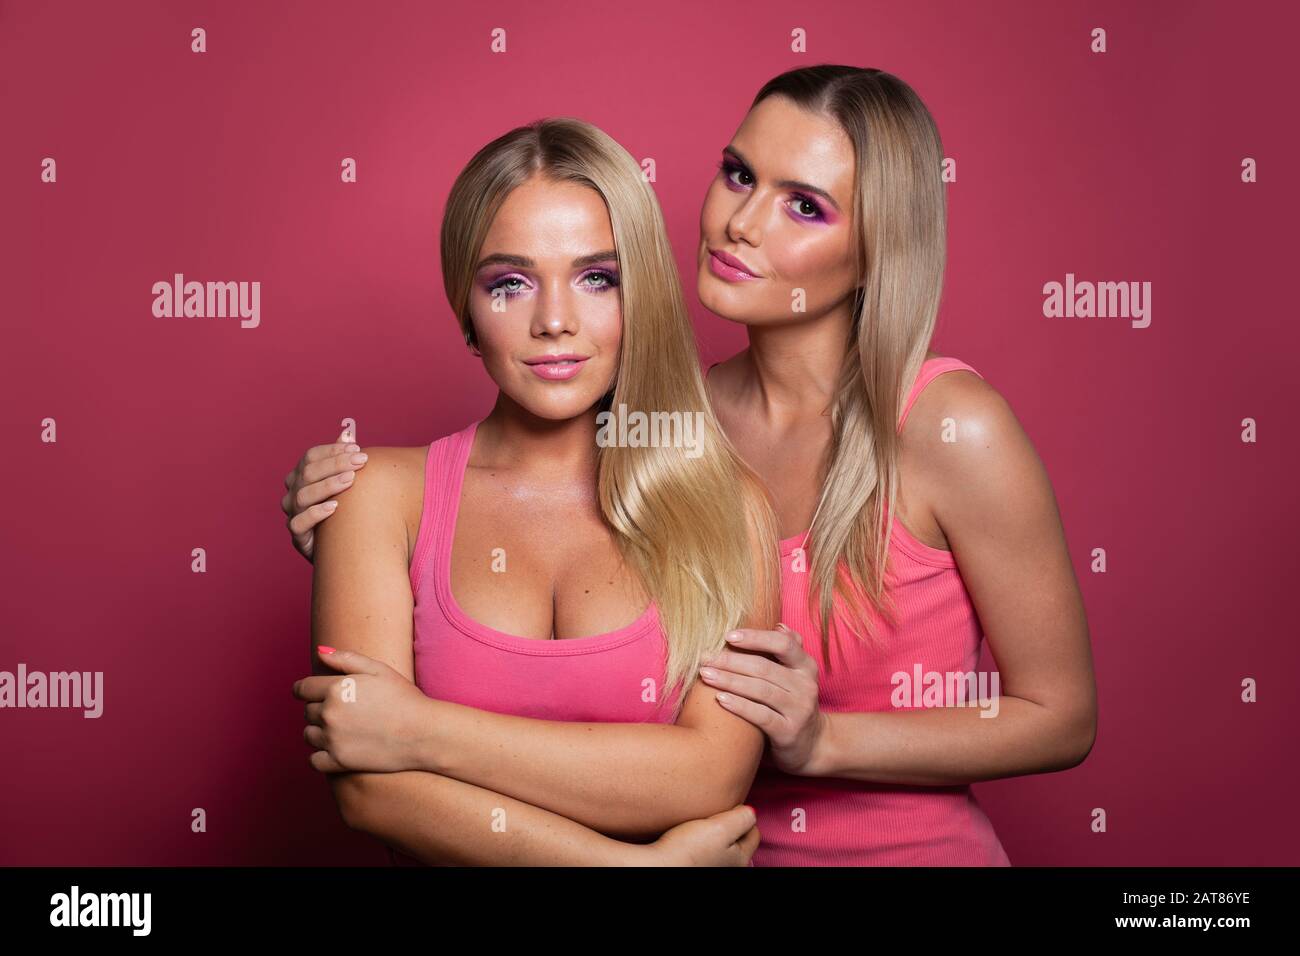 Two blonde models girls in pink shirt on pink background Stock Photo